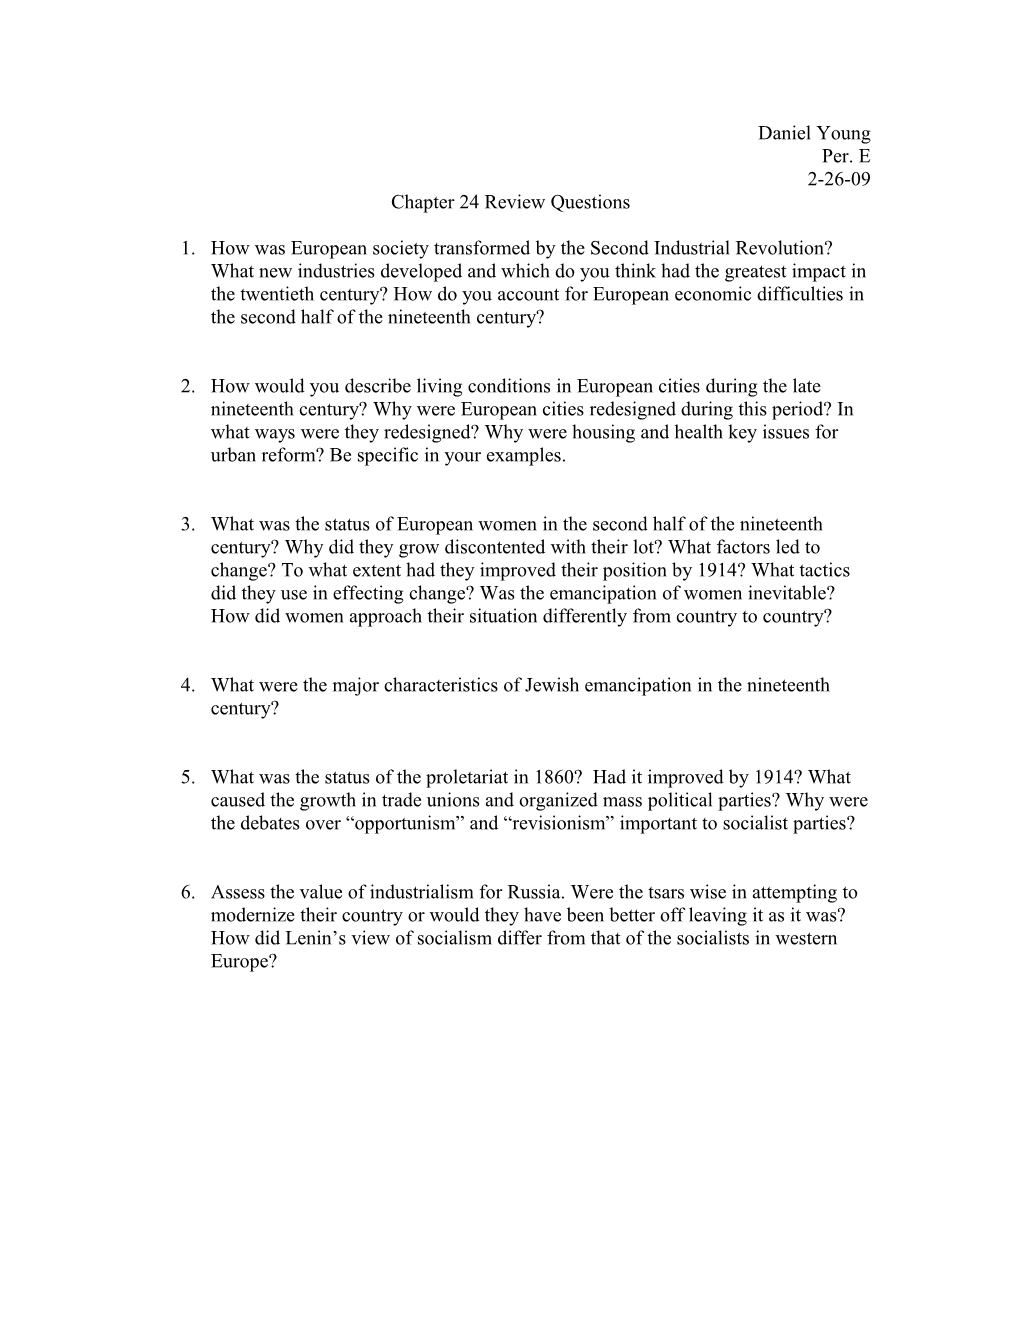 Chapter 24 Review Questions